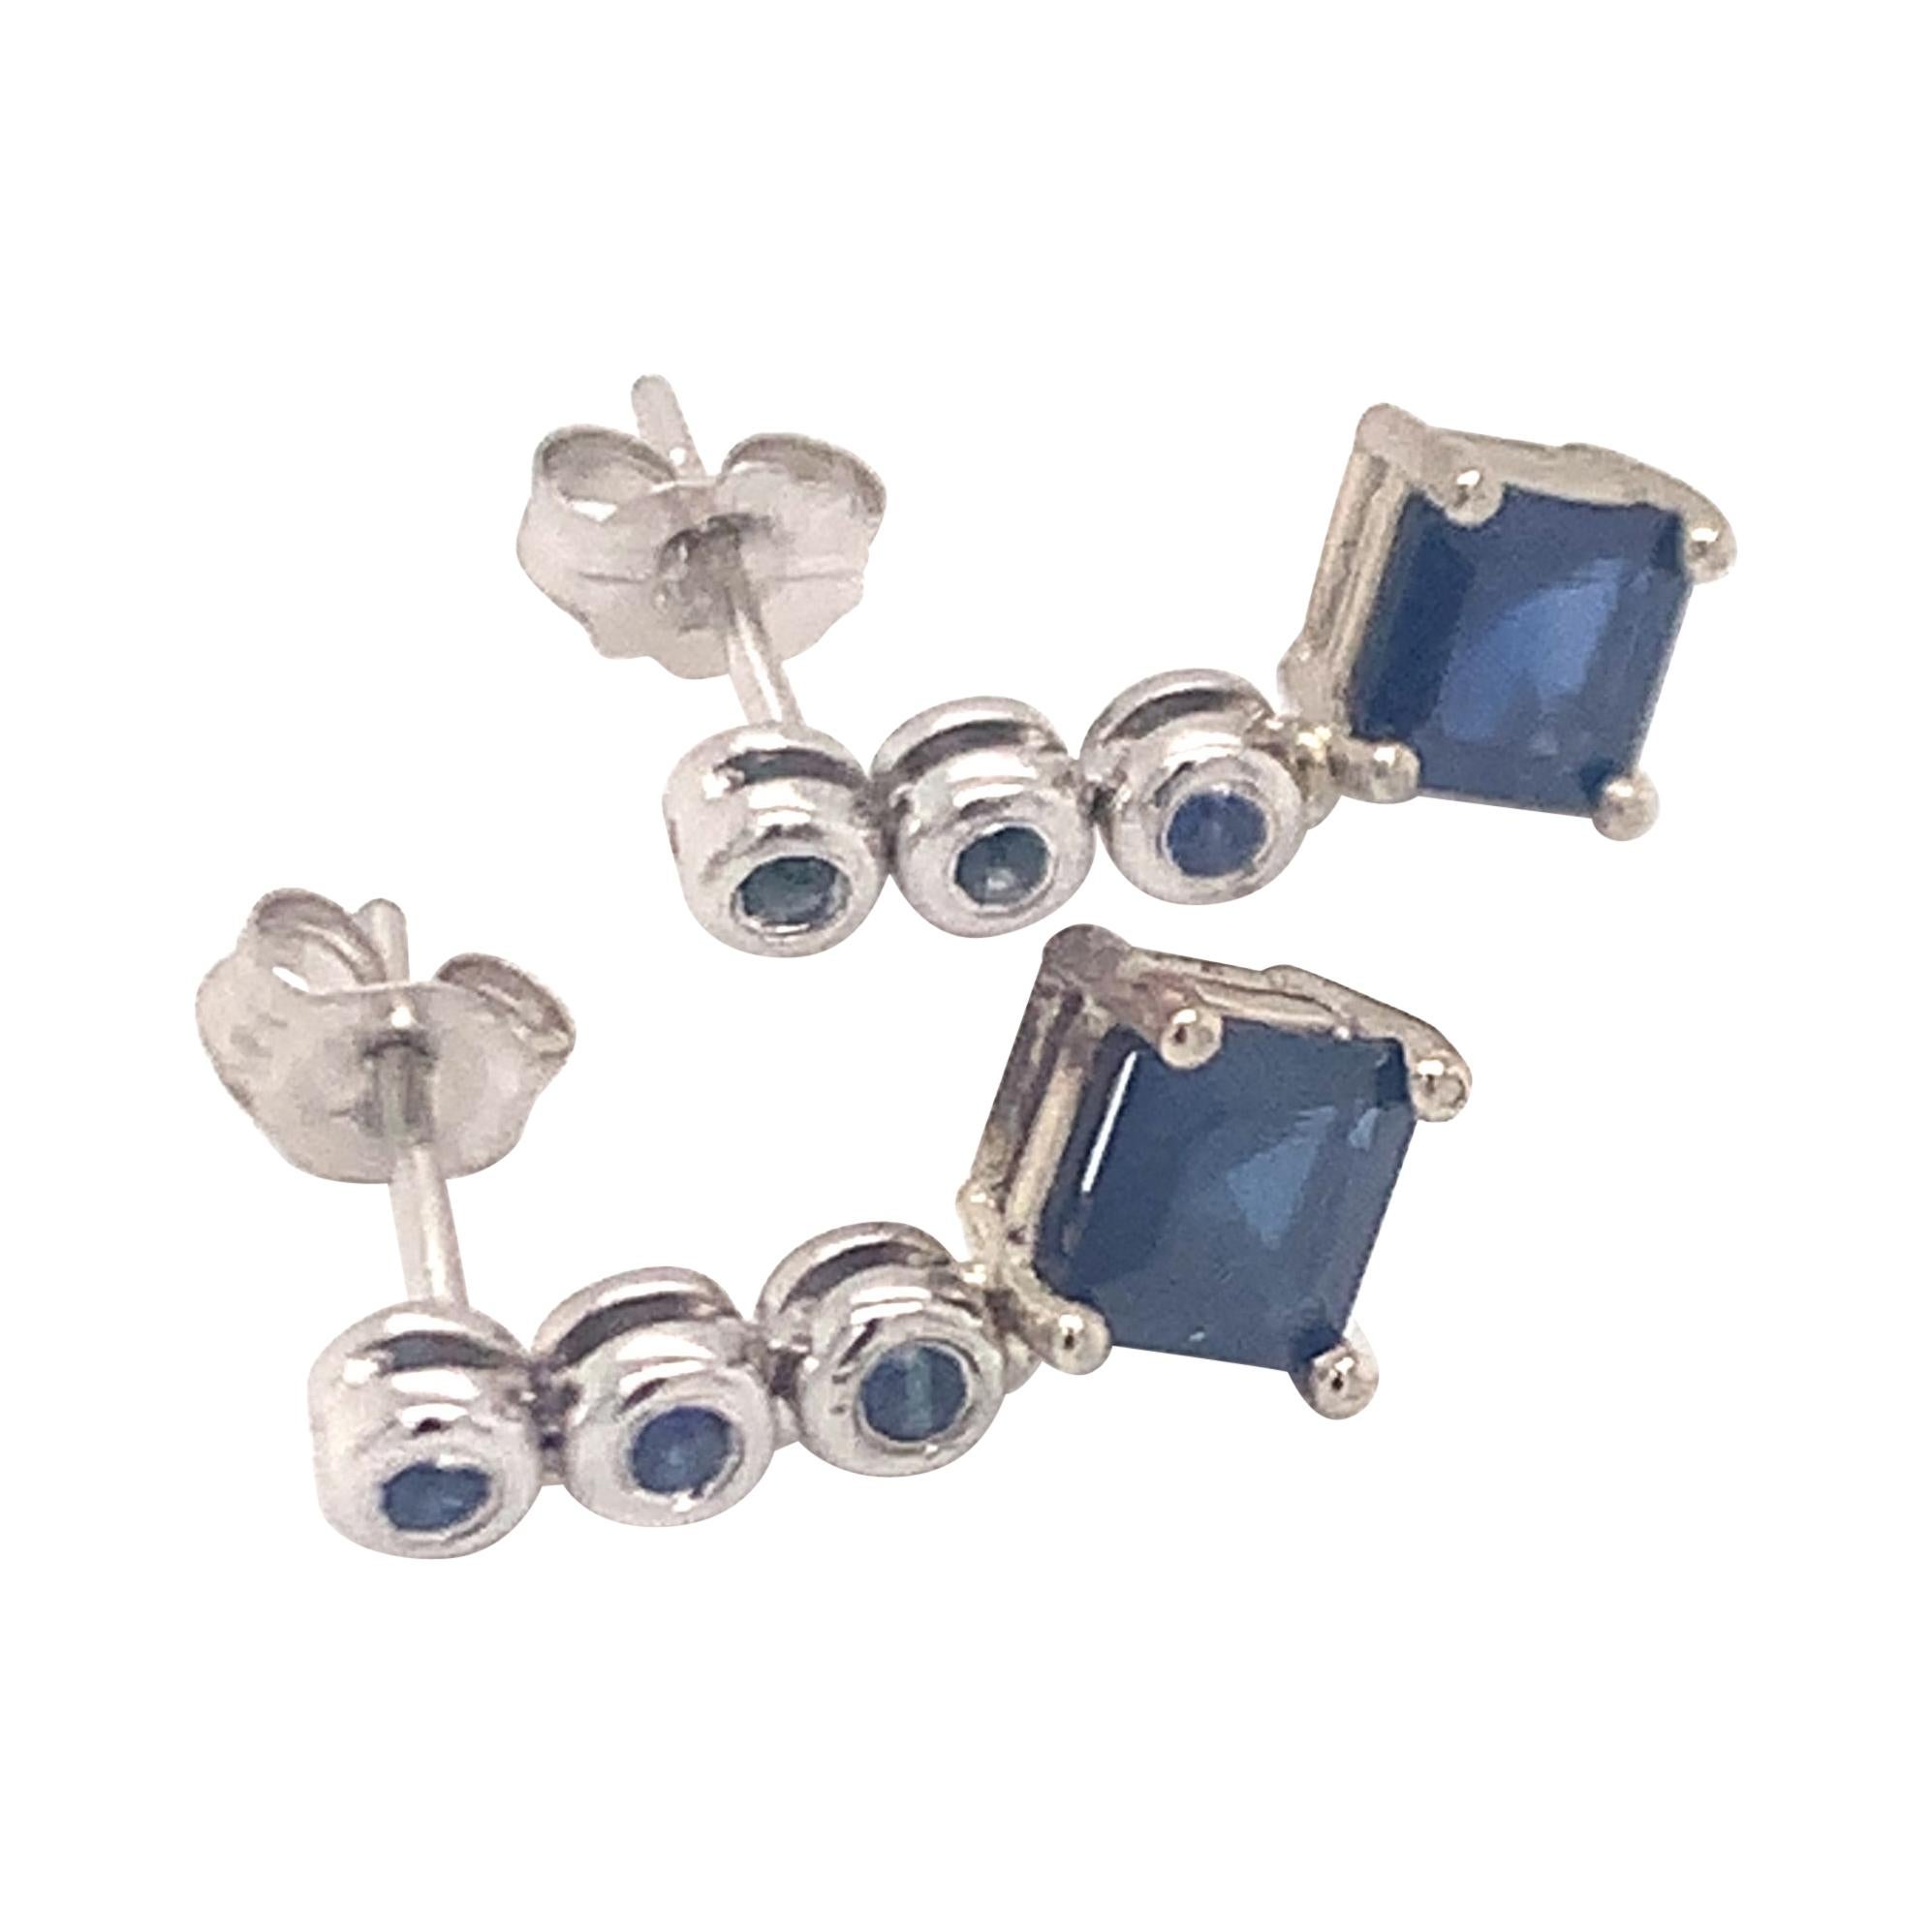 Natural Finely Faceted Quality Sapphire Dangle Earrings 14k Gold 1.32 TCW Certified $2,490 113471

This is a Unique Custom Made Glamorous Piece of Jewelry!

Nothing says, “I Love you” more than Diamonds and Pearls!

These Sapphire earrings have been